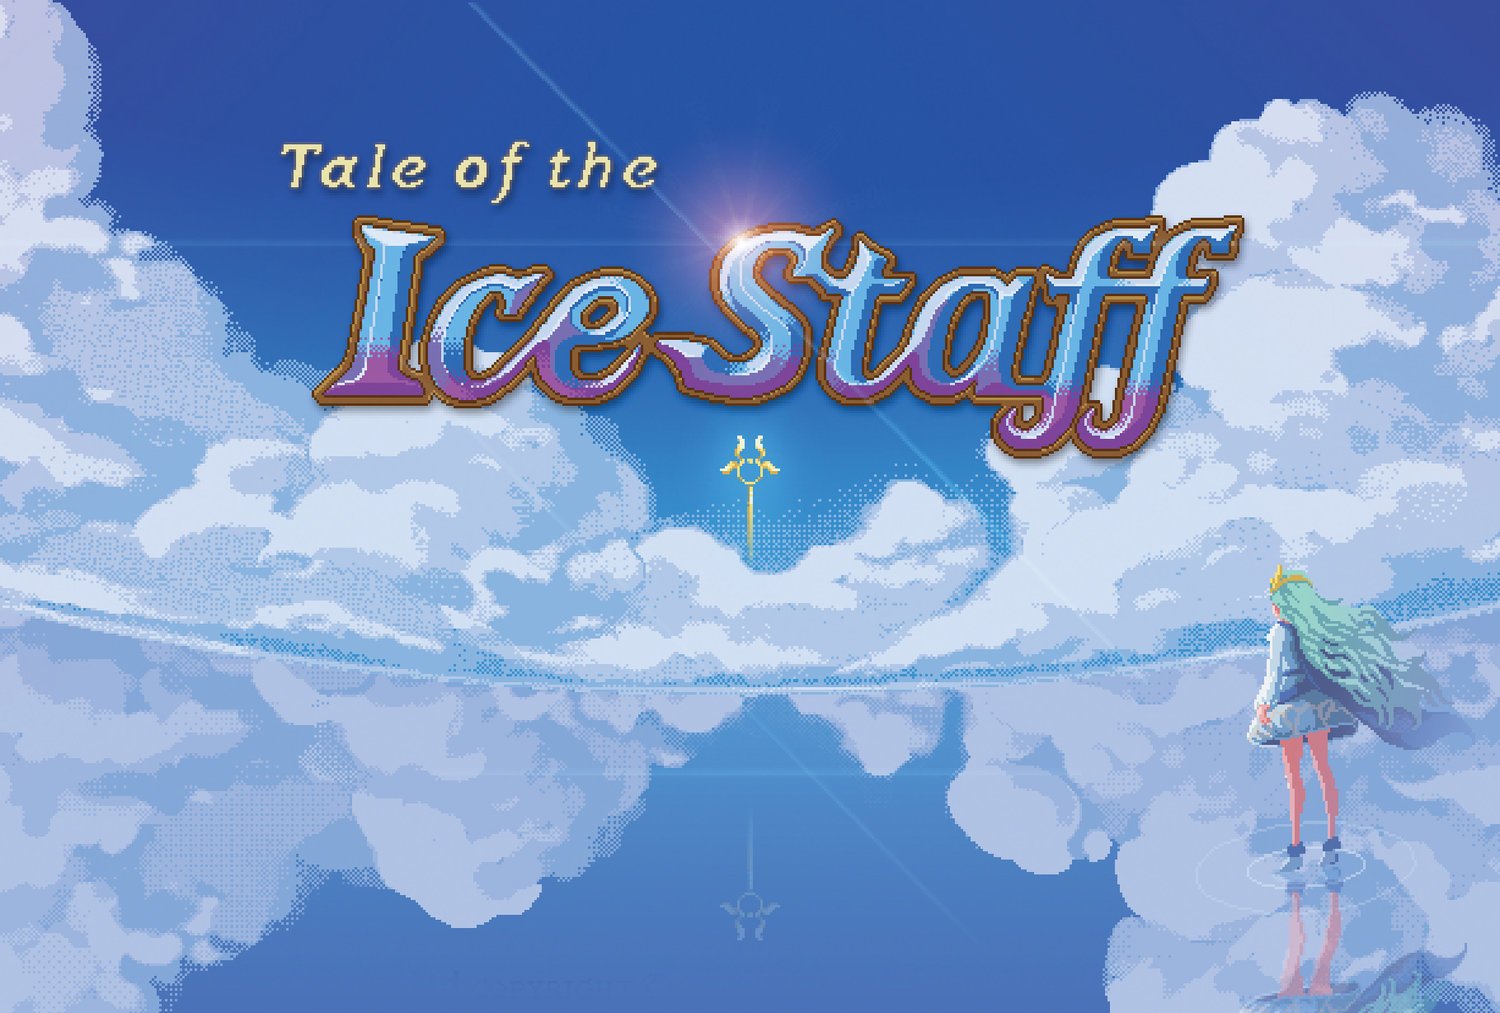 Image of Tale of the Ice Staff